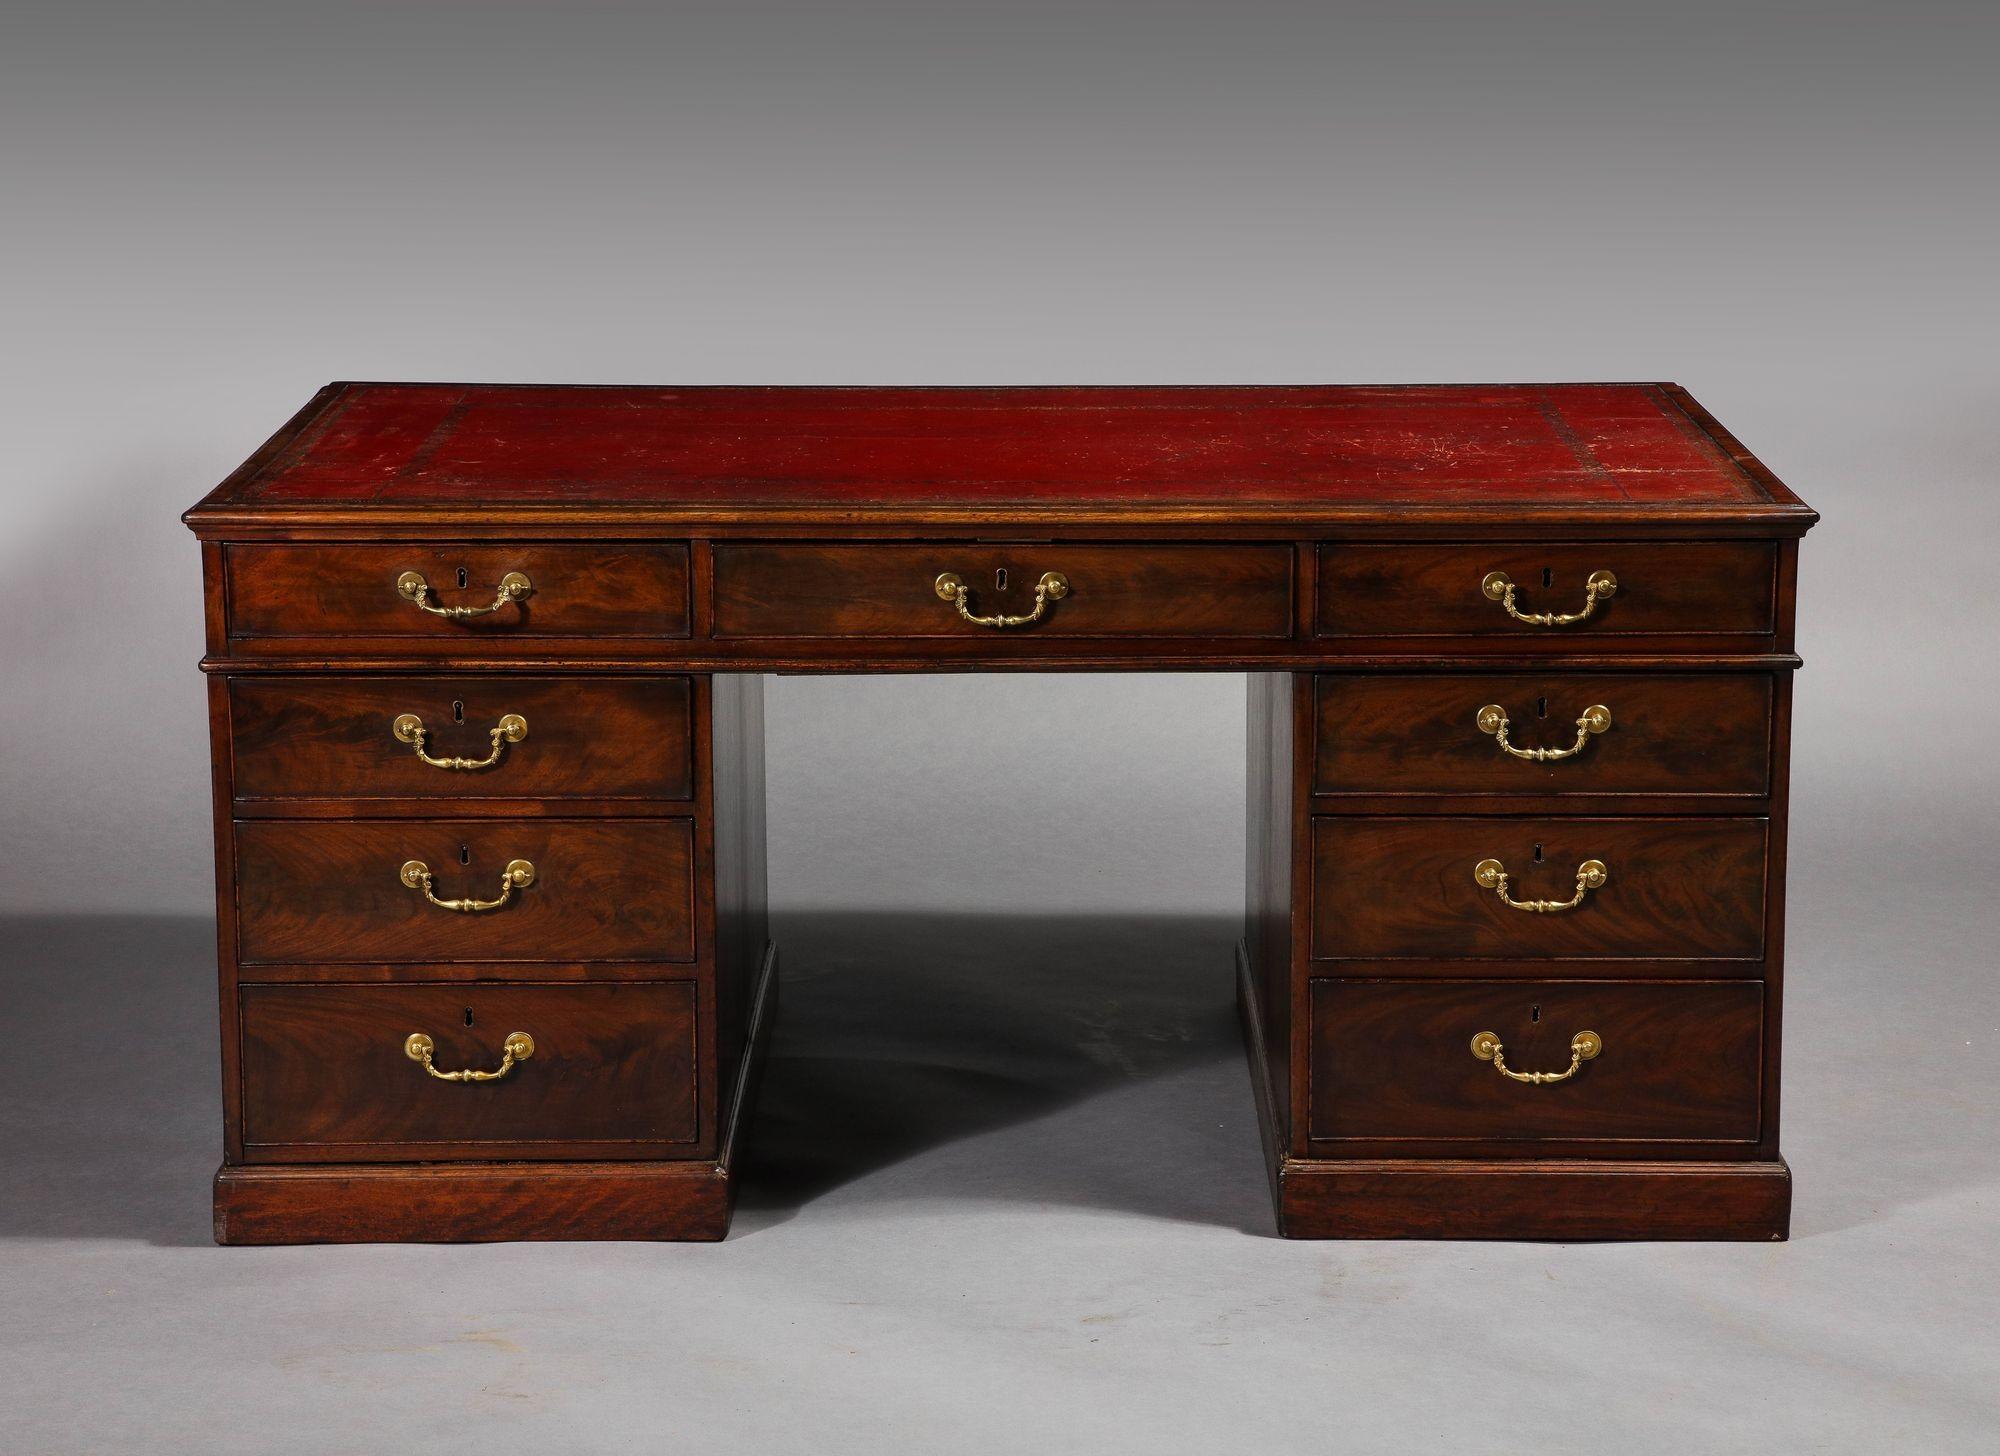 Fine and rare George III period mahogany partner's desk, the molded top with inset Morocco red leather top with gilt tooling over two sides both with two banks of working doors and retaining original gilt lacquered hardware, the whole with